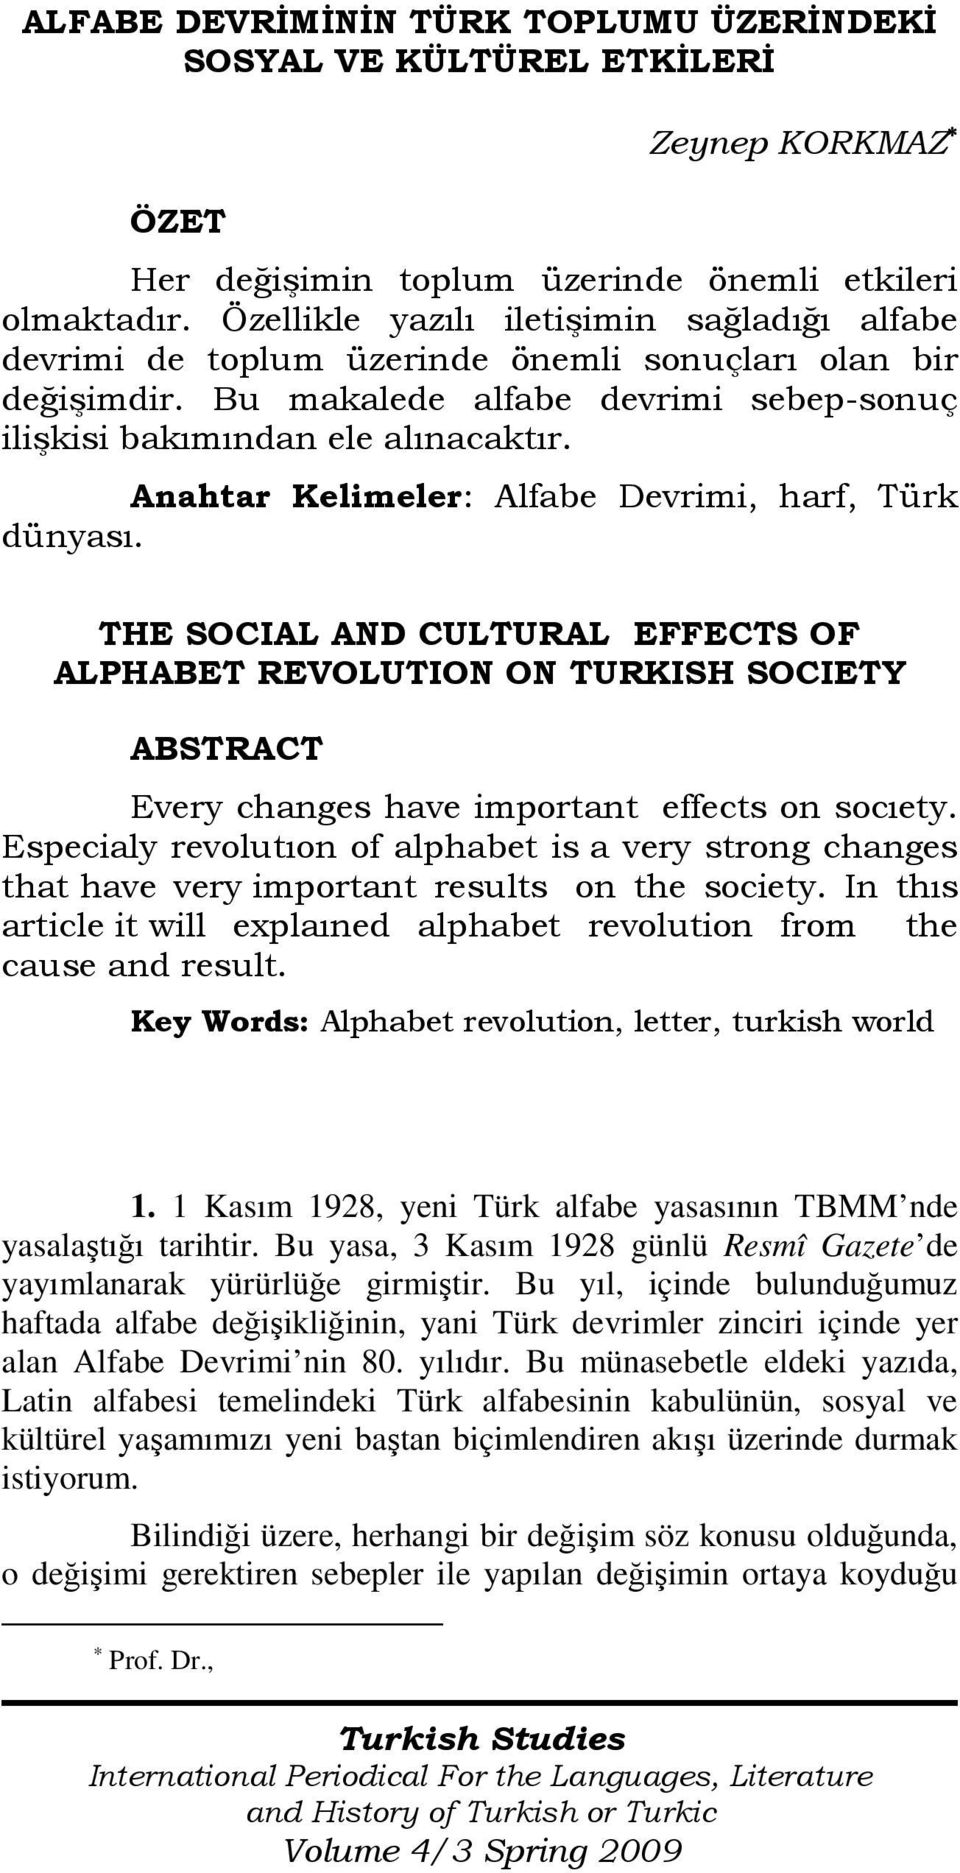 Anahtar Kelimeler: Alfabe Devrimi, harf, Türk dünyası. THE SOCIAL AND CULTURAL EFFECTS OF ALPHABET REVOLUTION ON TURKISH SOCIETY ABSTRACT Every changes have important effects on socıety.